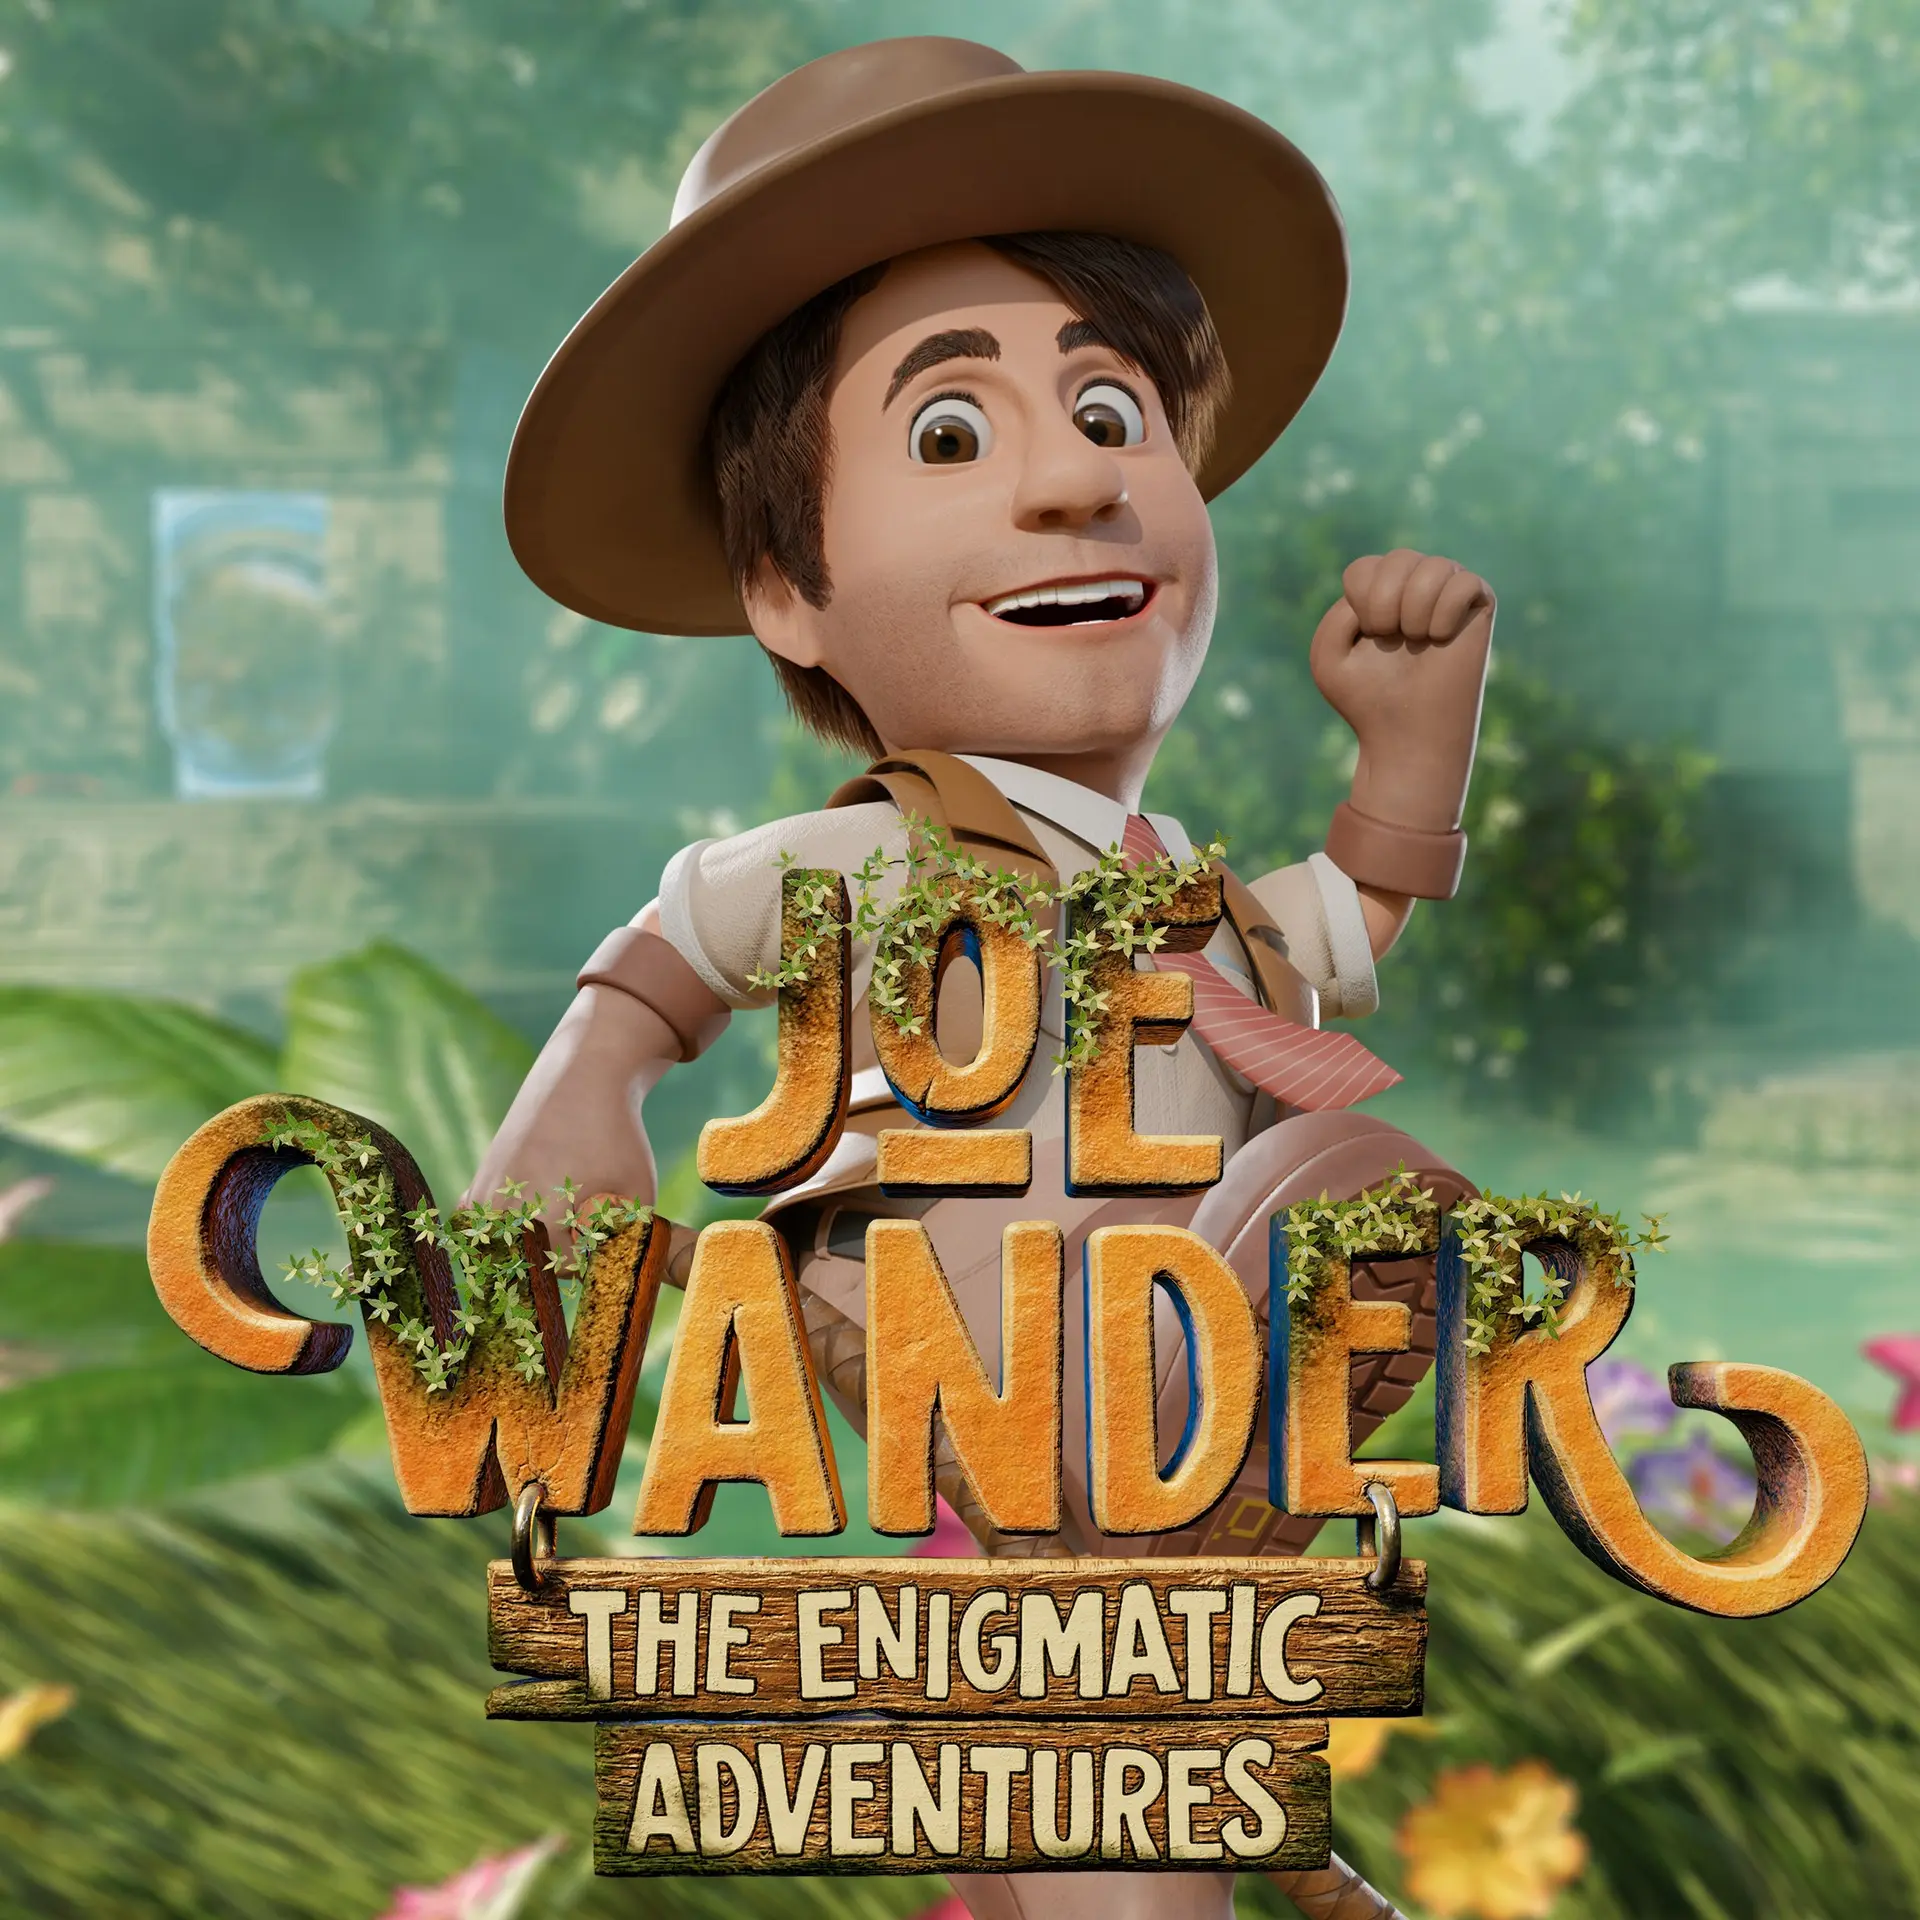 Joe Wander and the Enigmatic adventures (Xbox Games UK)